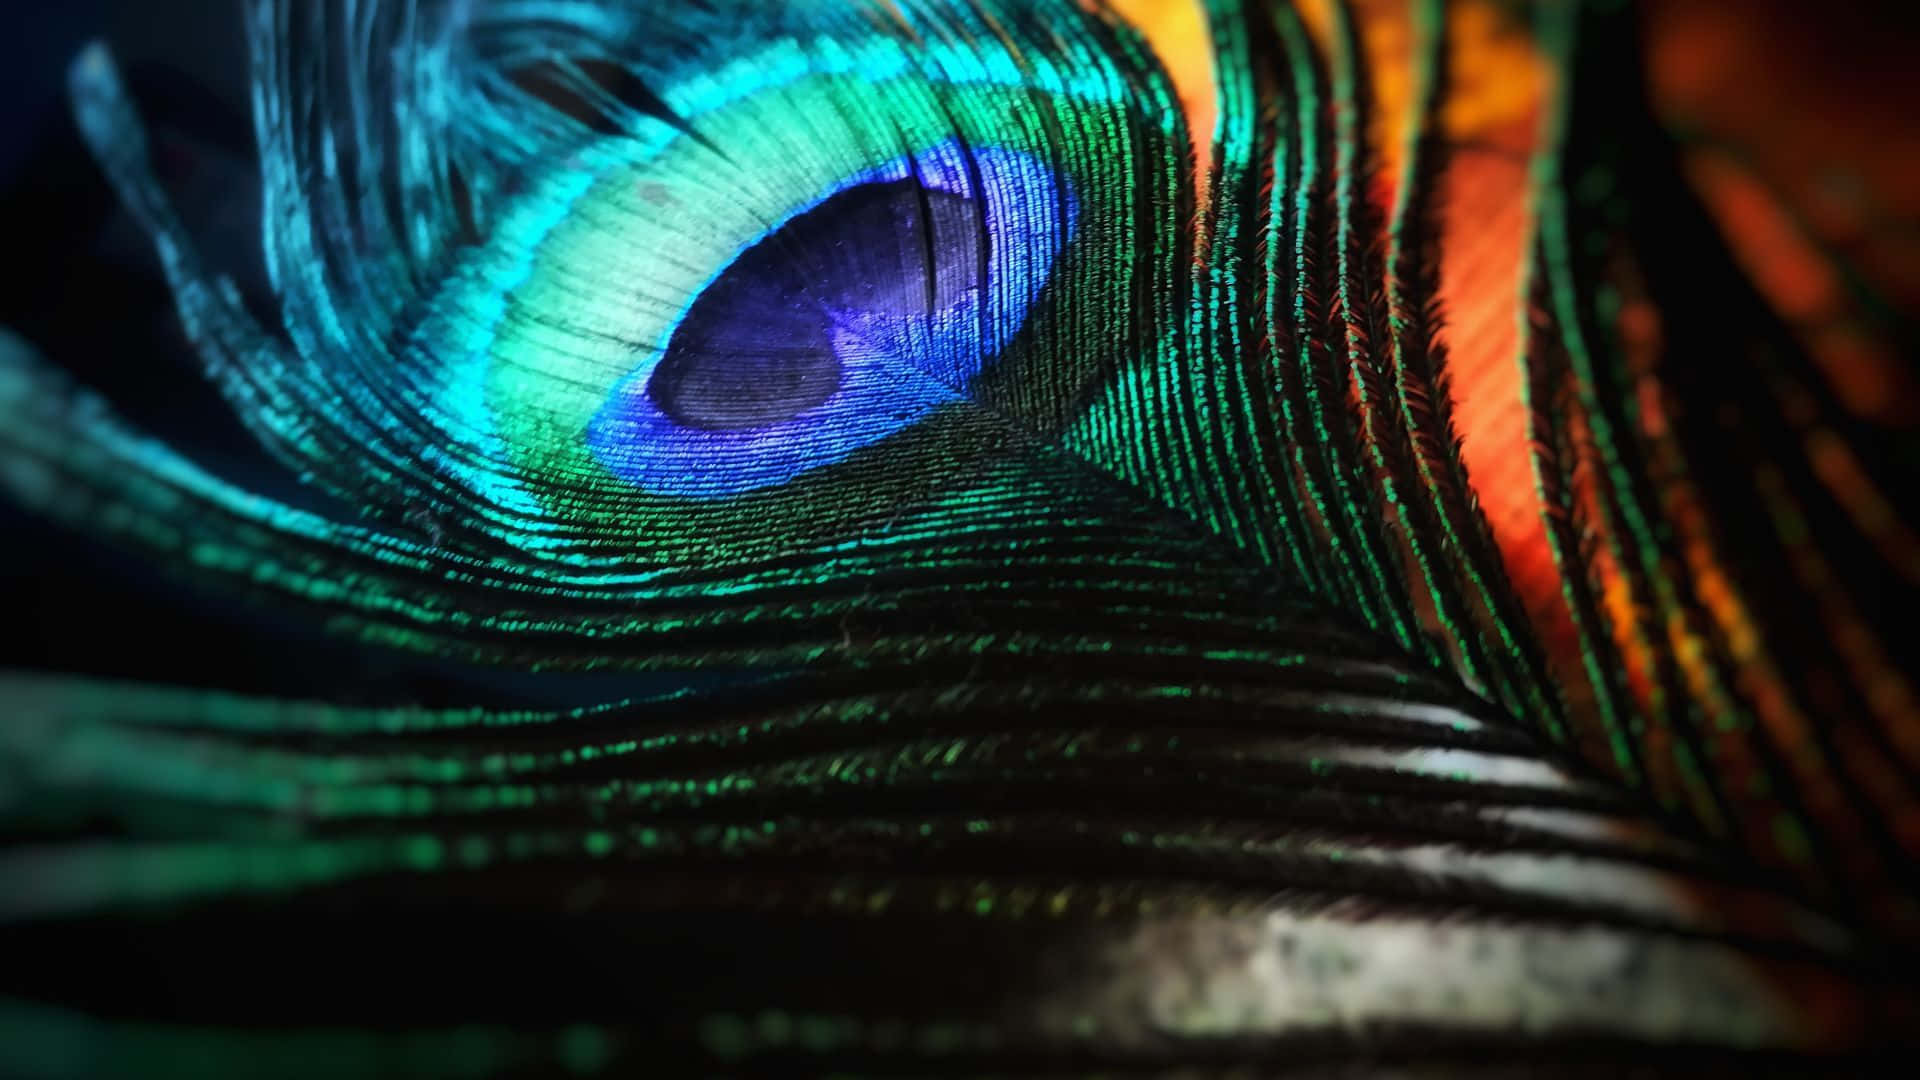 Peacock feather texture mobile wallpaper, | Free Photo - rawpixel